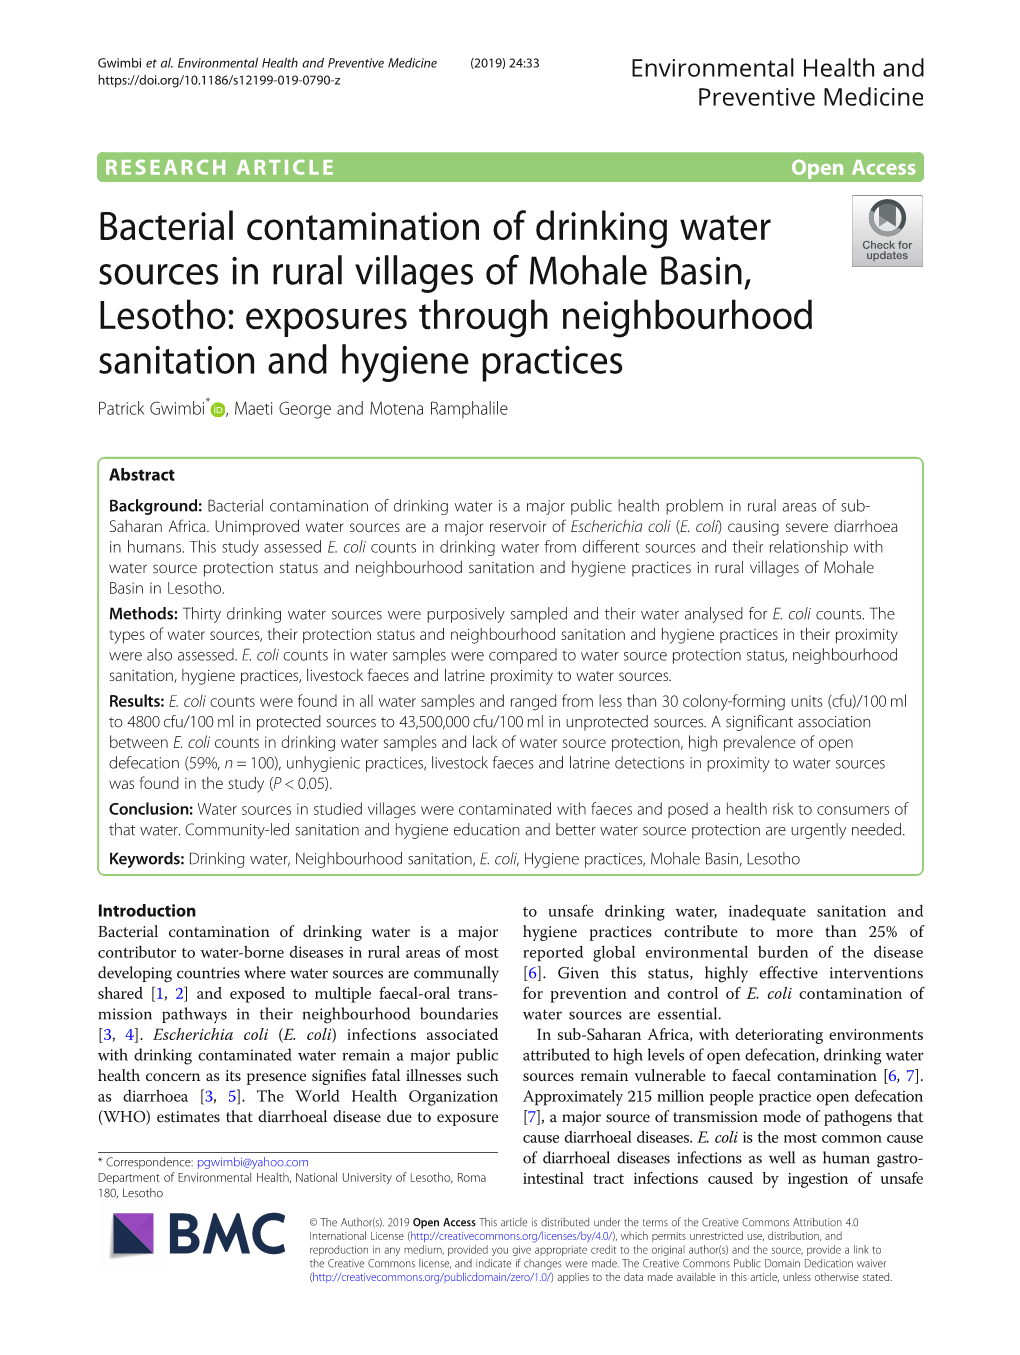 Bacterial Contamination of Drinking Water Sources in Rural Villages Of